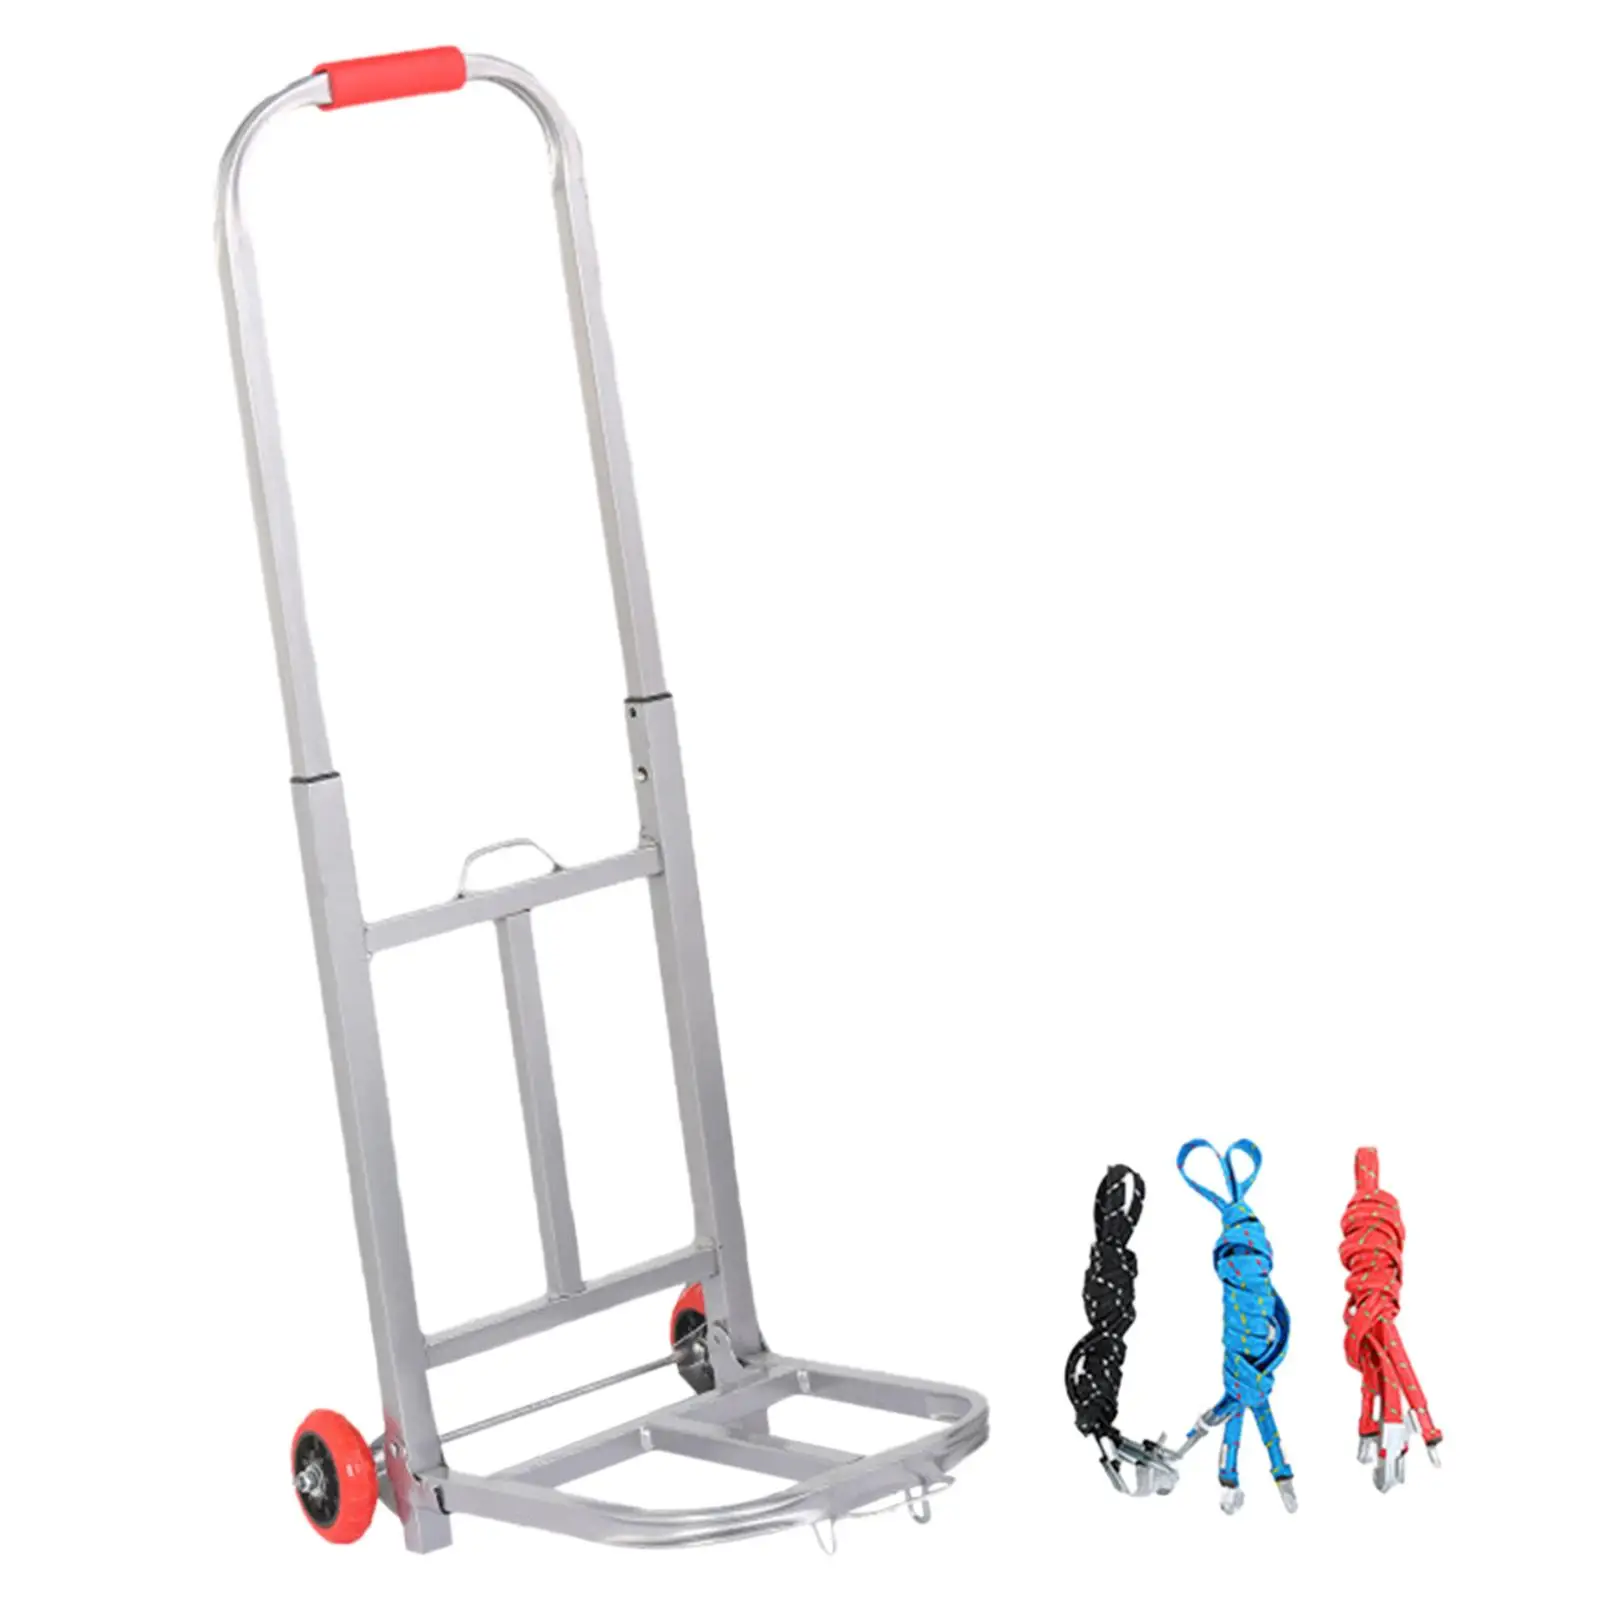 Collapsible Hand Truck Luggage Trolley Cart Metal Frame for Personal Travel